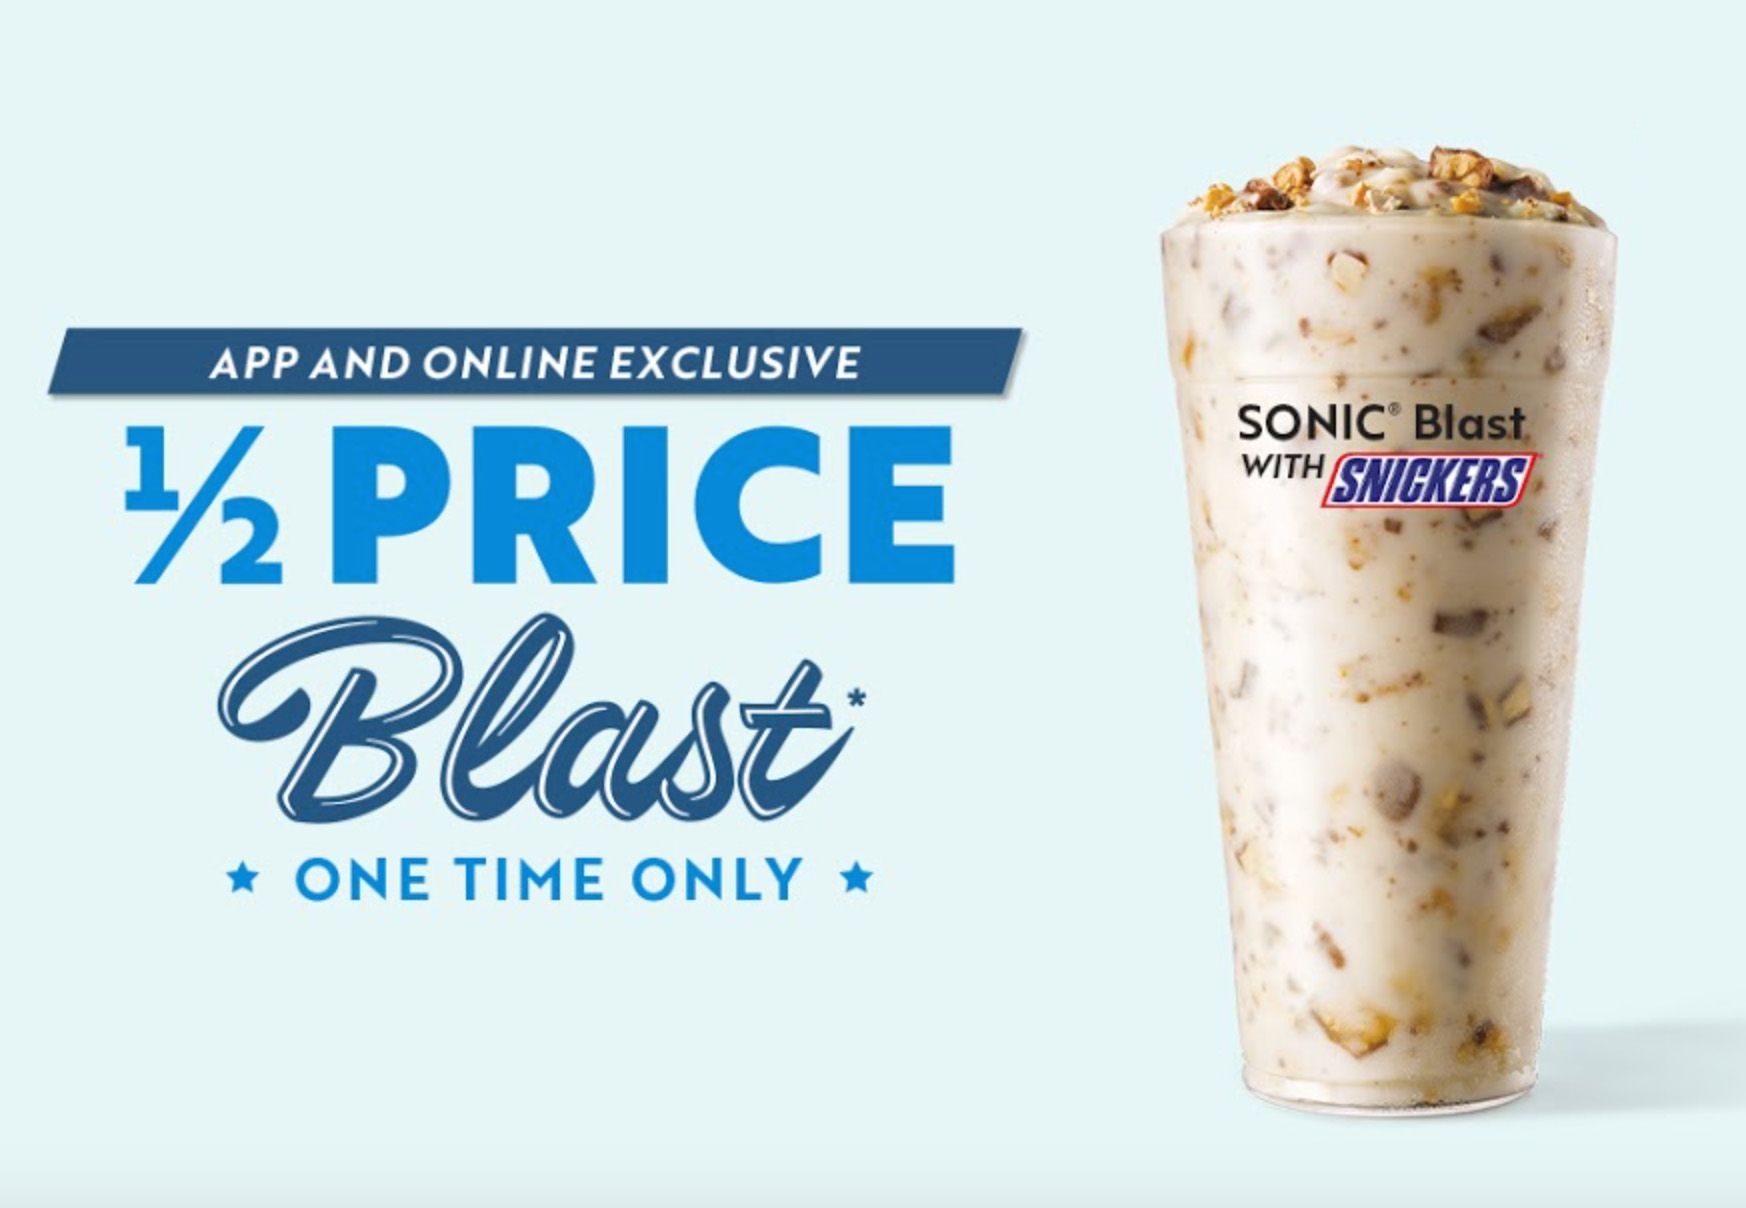 Sonic Rewards Members Can Now Receive a Half Priced Sonic Blast with Snickers through an Online or In-app Order